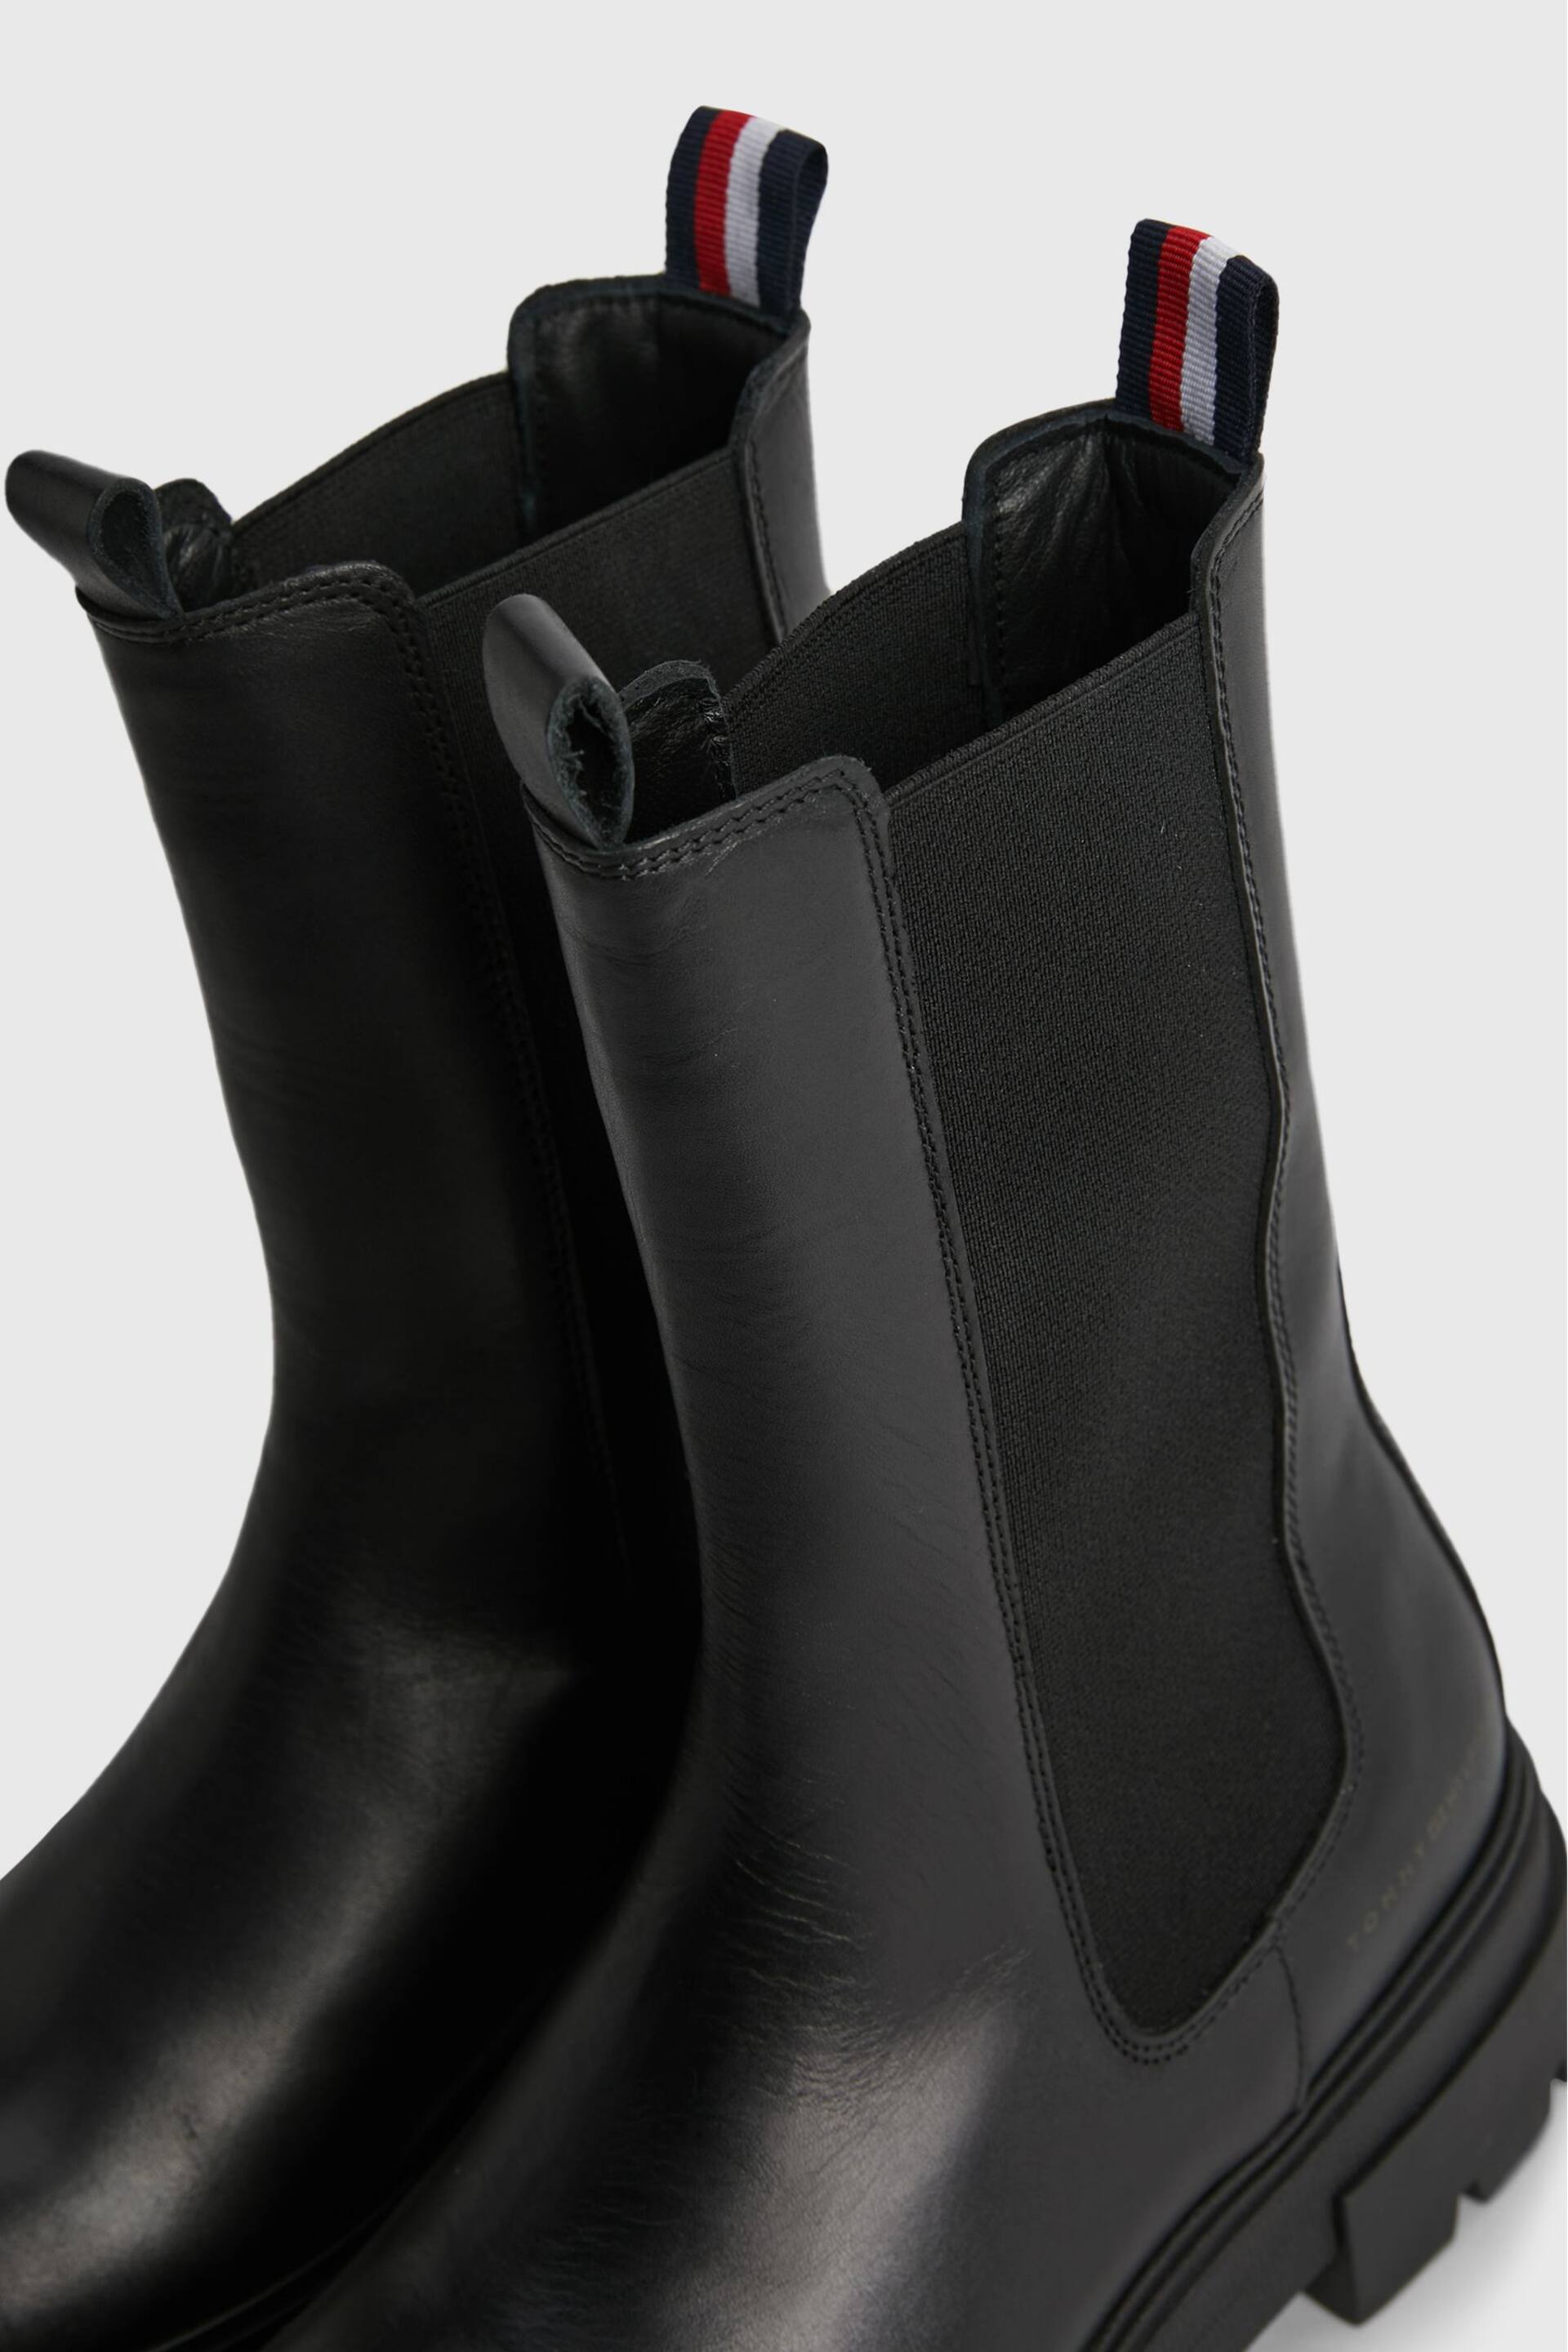 Tommy Hilfiger High Rise Chelsea Black Boots - Image 6 of 6